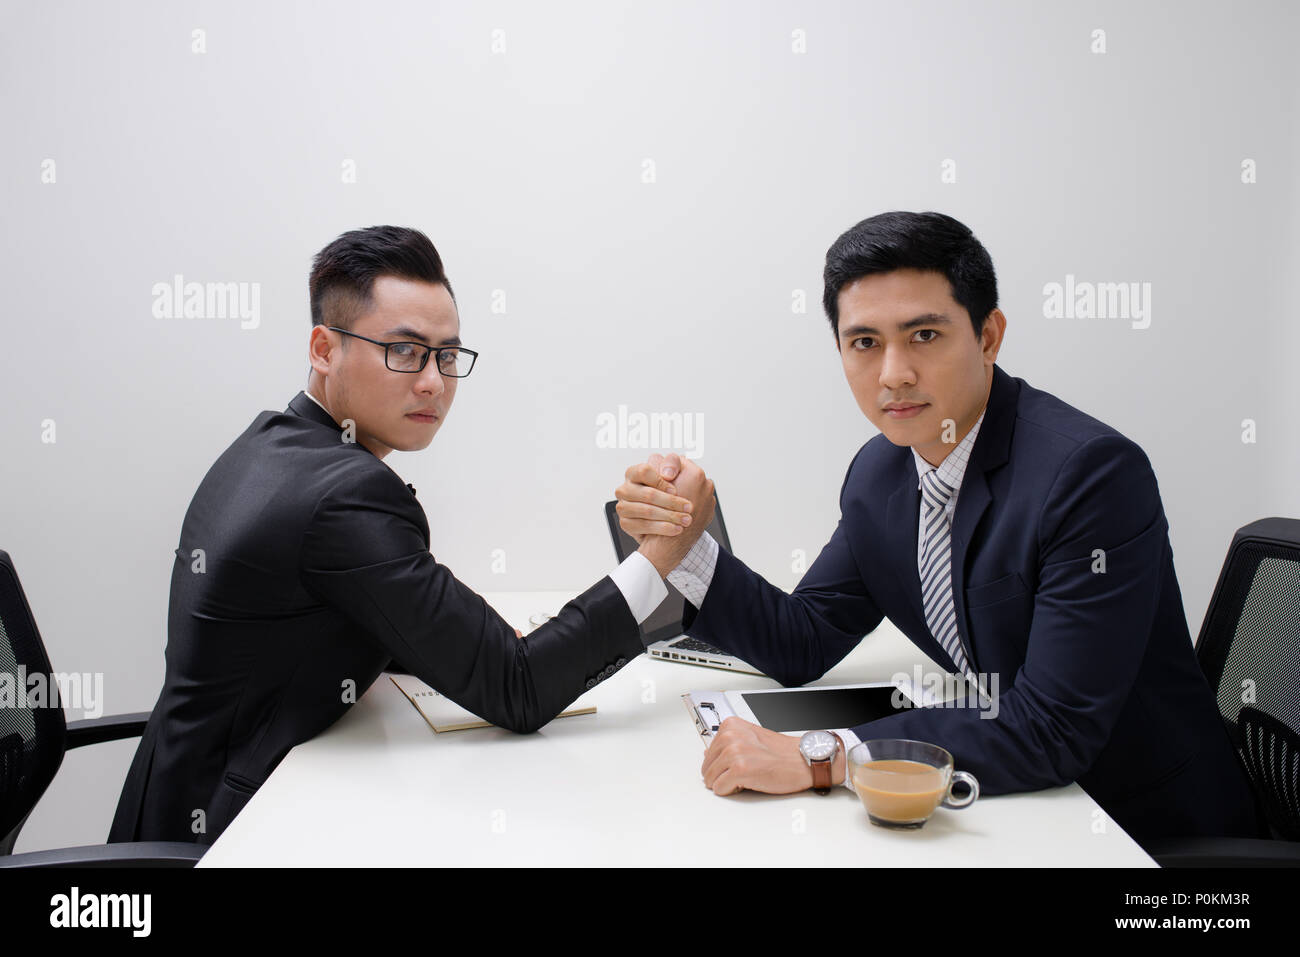 Two businessmen competing arm wrestling in office Stock Photo